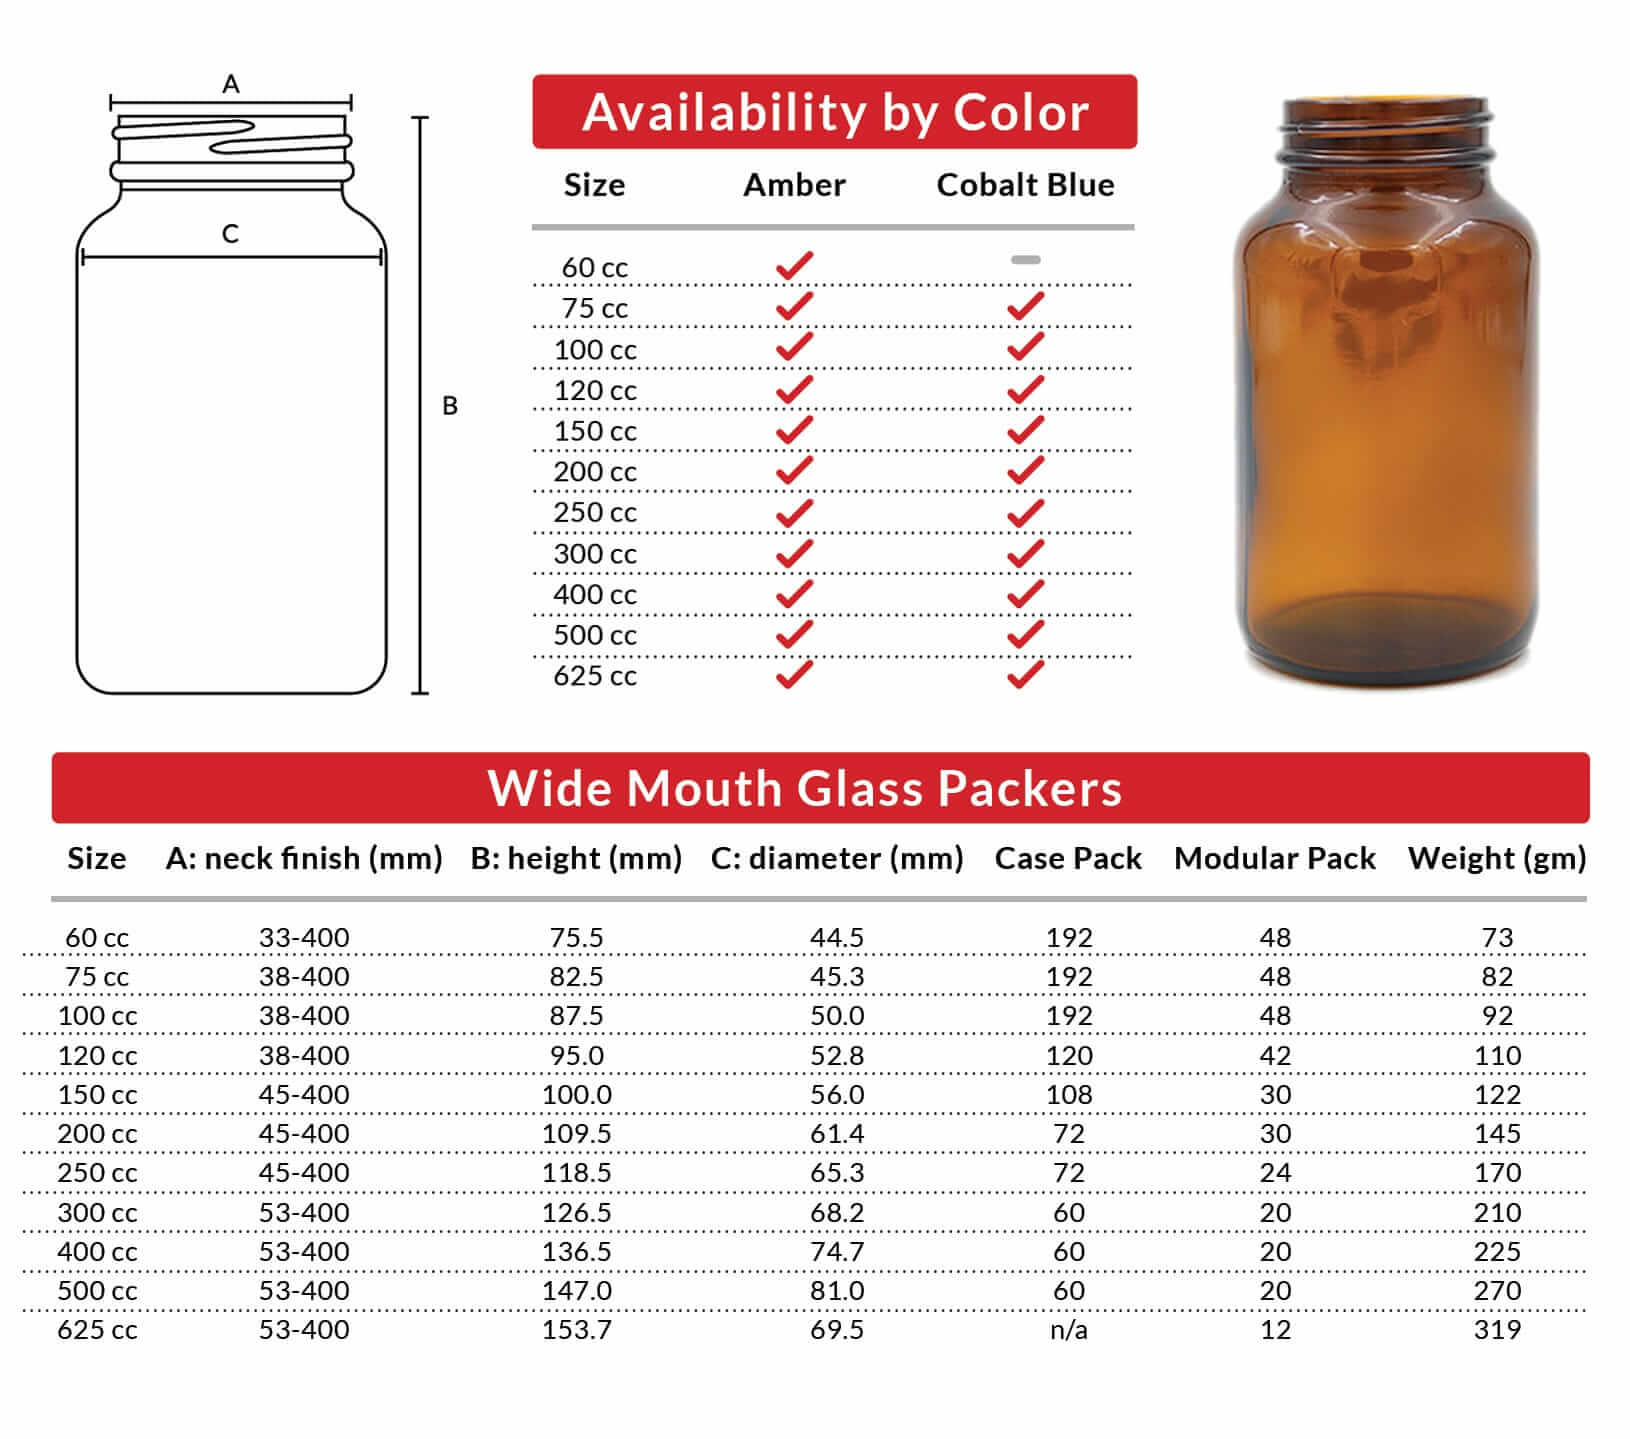 Glass Wide Mouth Packer Bottles - Availability